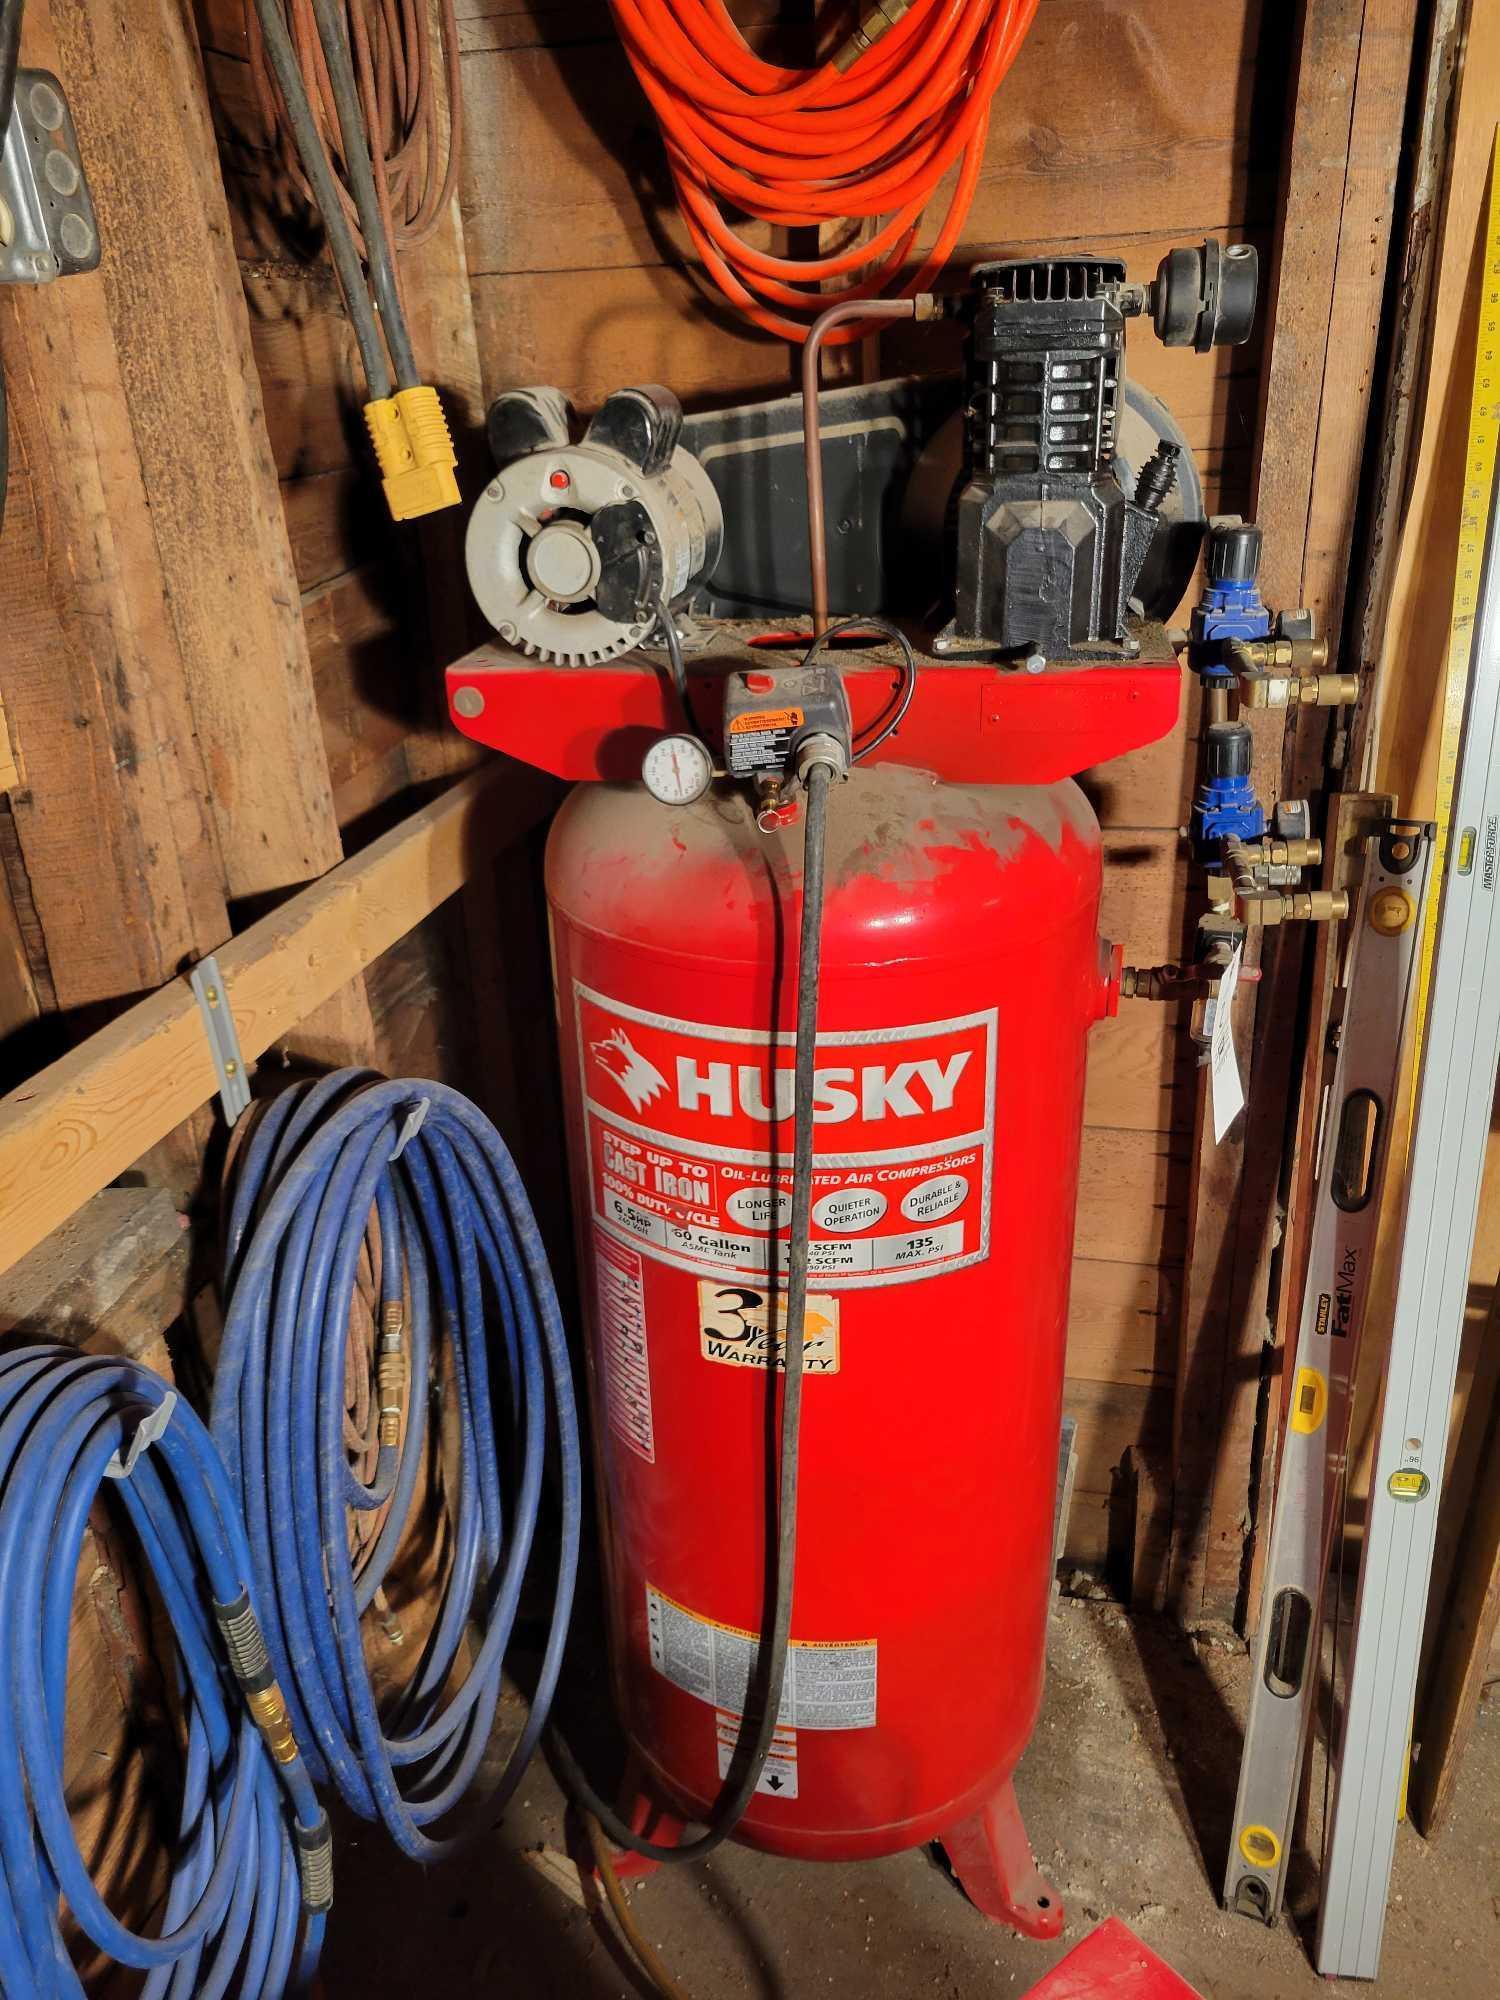 Husky 60gal 6.5hp 135 max psi single phase air compressor with hoses and accessories